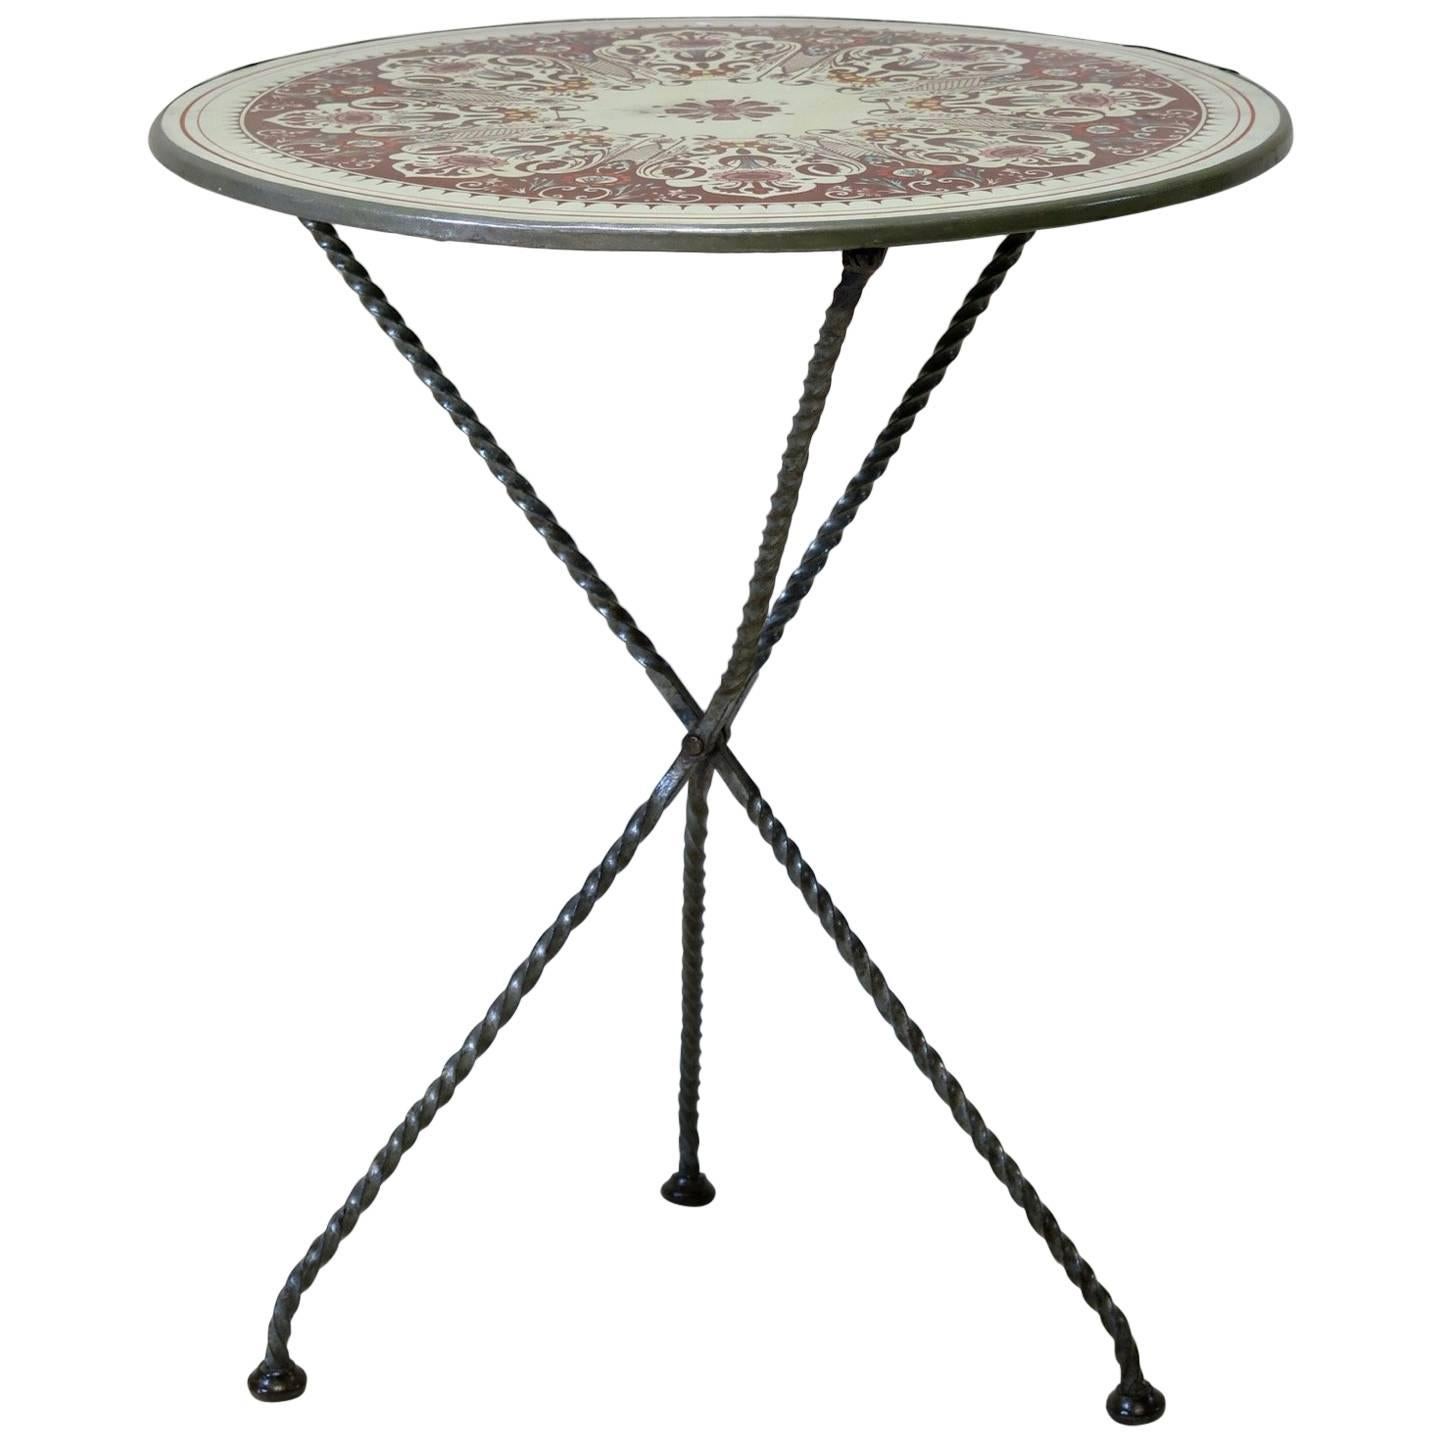 French 1920s Enameled Tripod Table For Sale